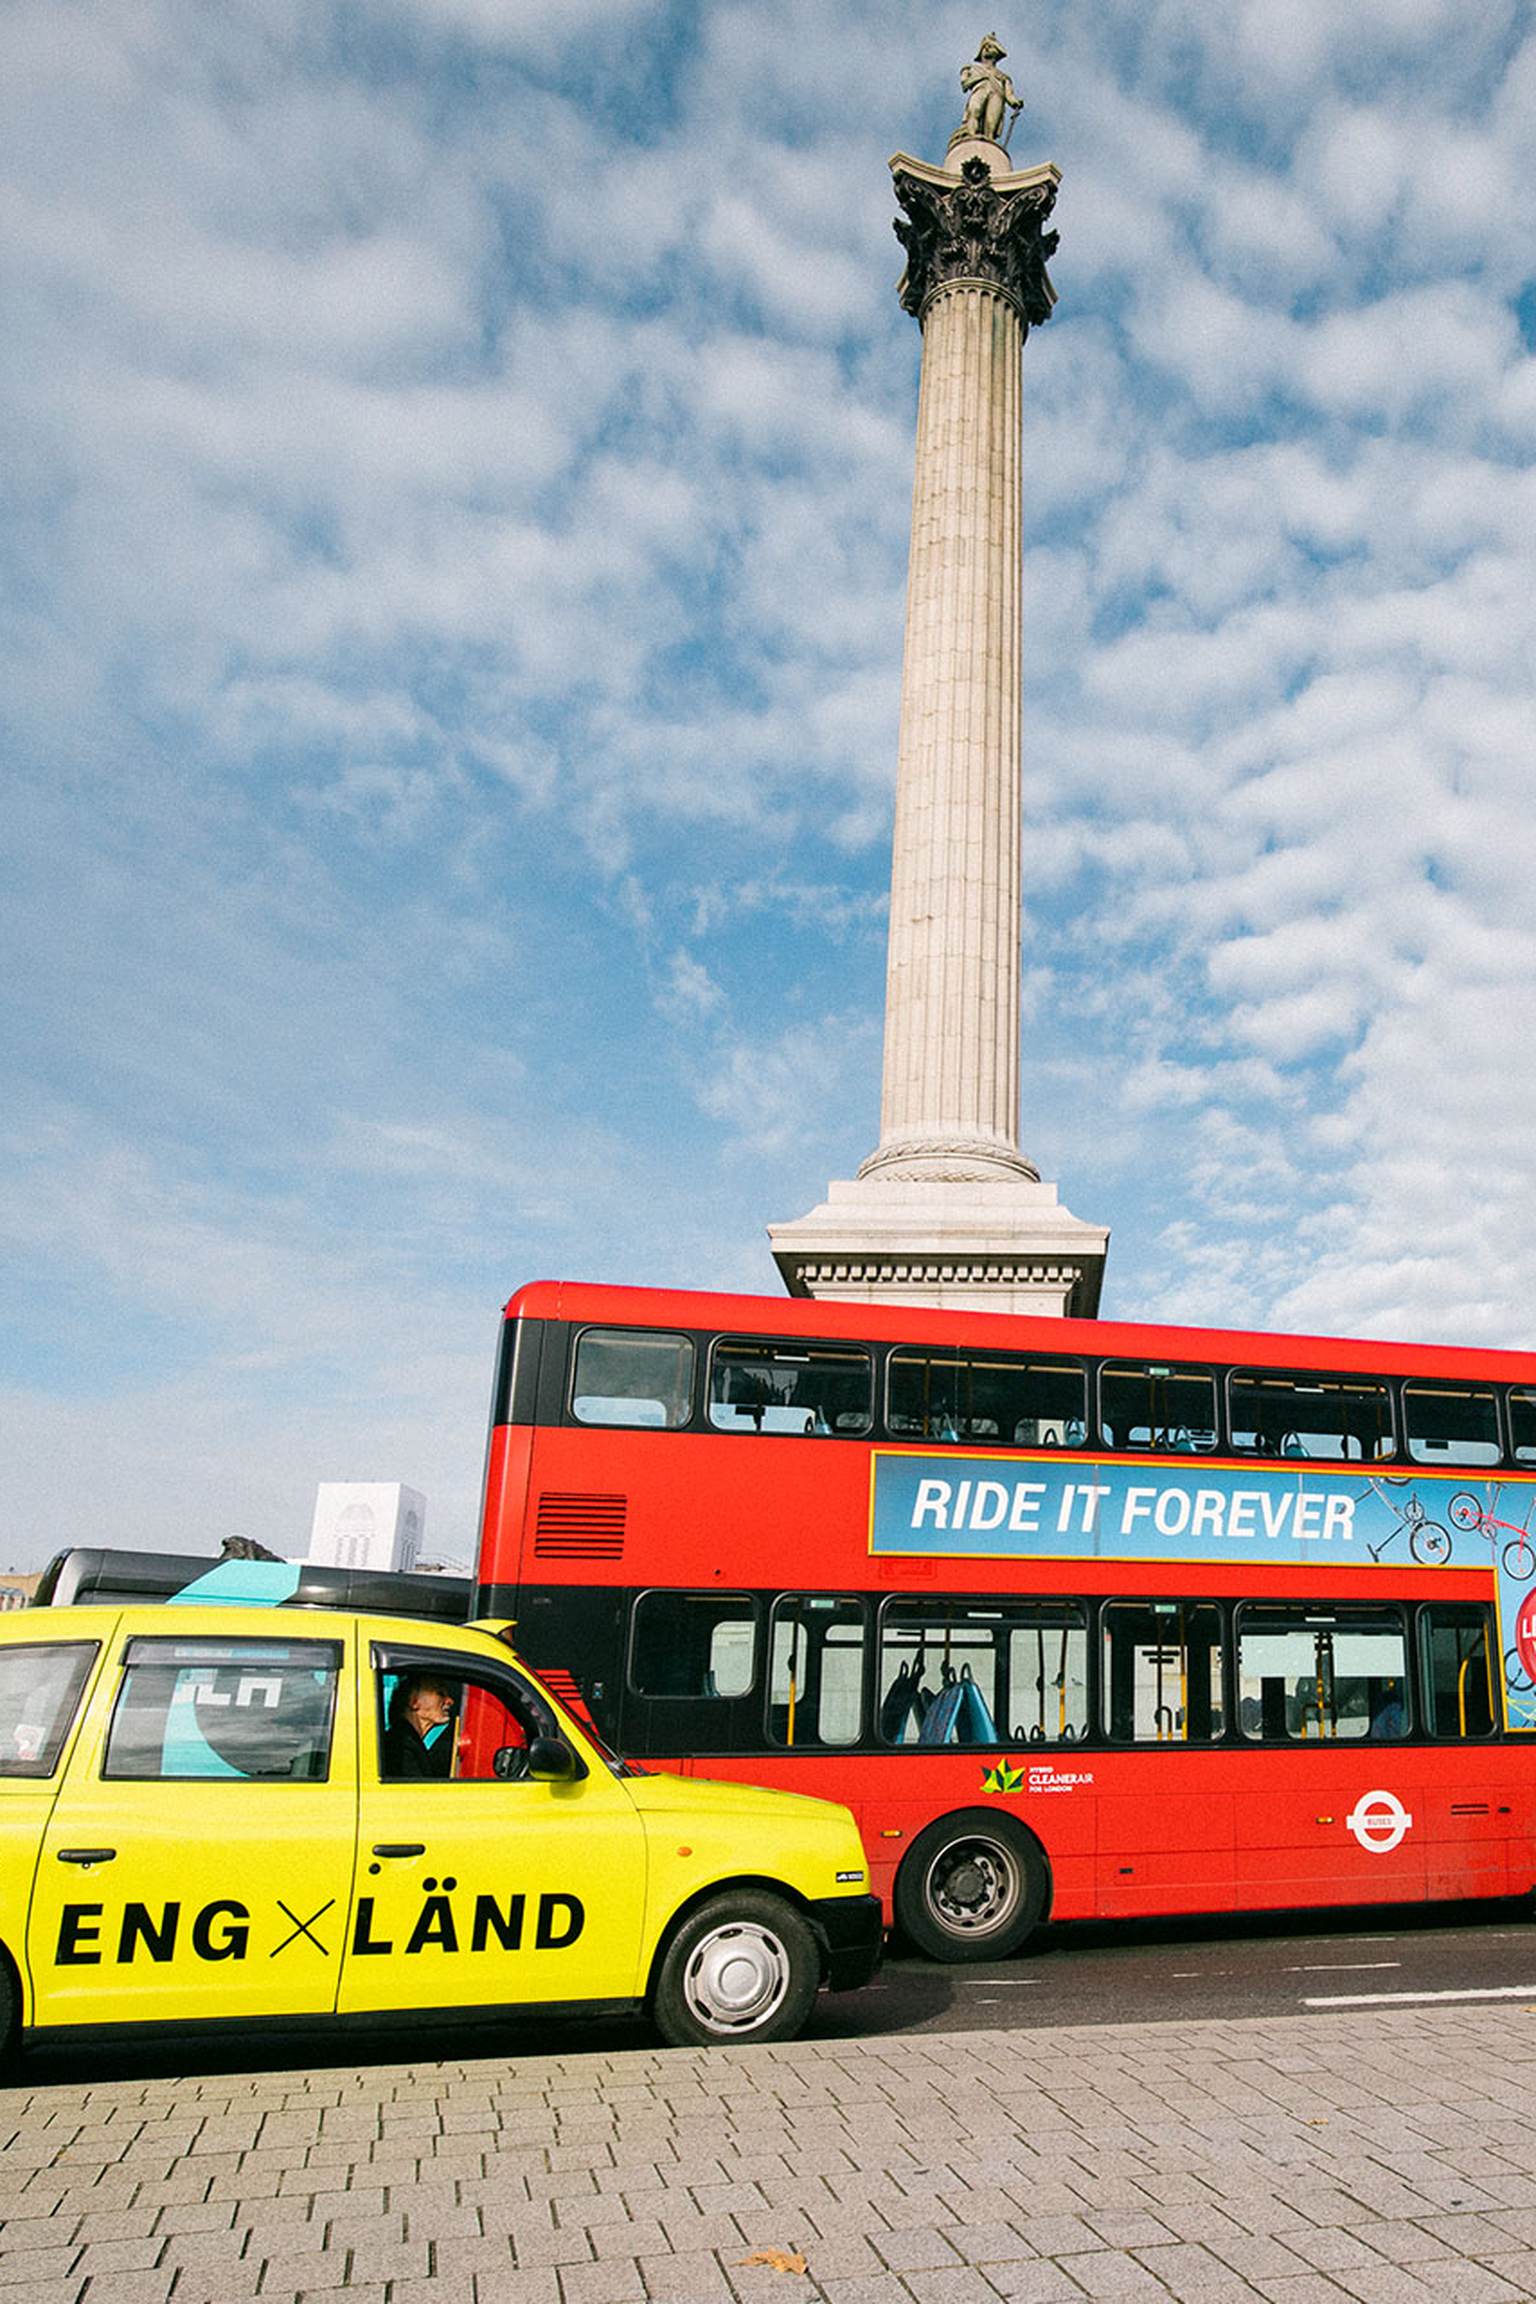 A neon yellow cab and a red tourist bus are standing in front of the Buckingham Palace in England.